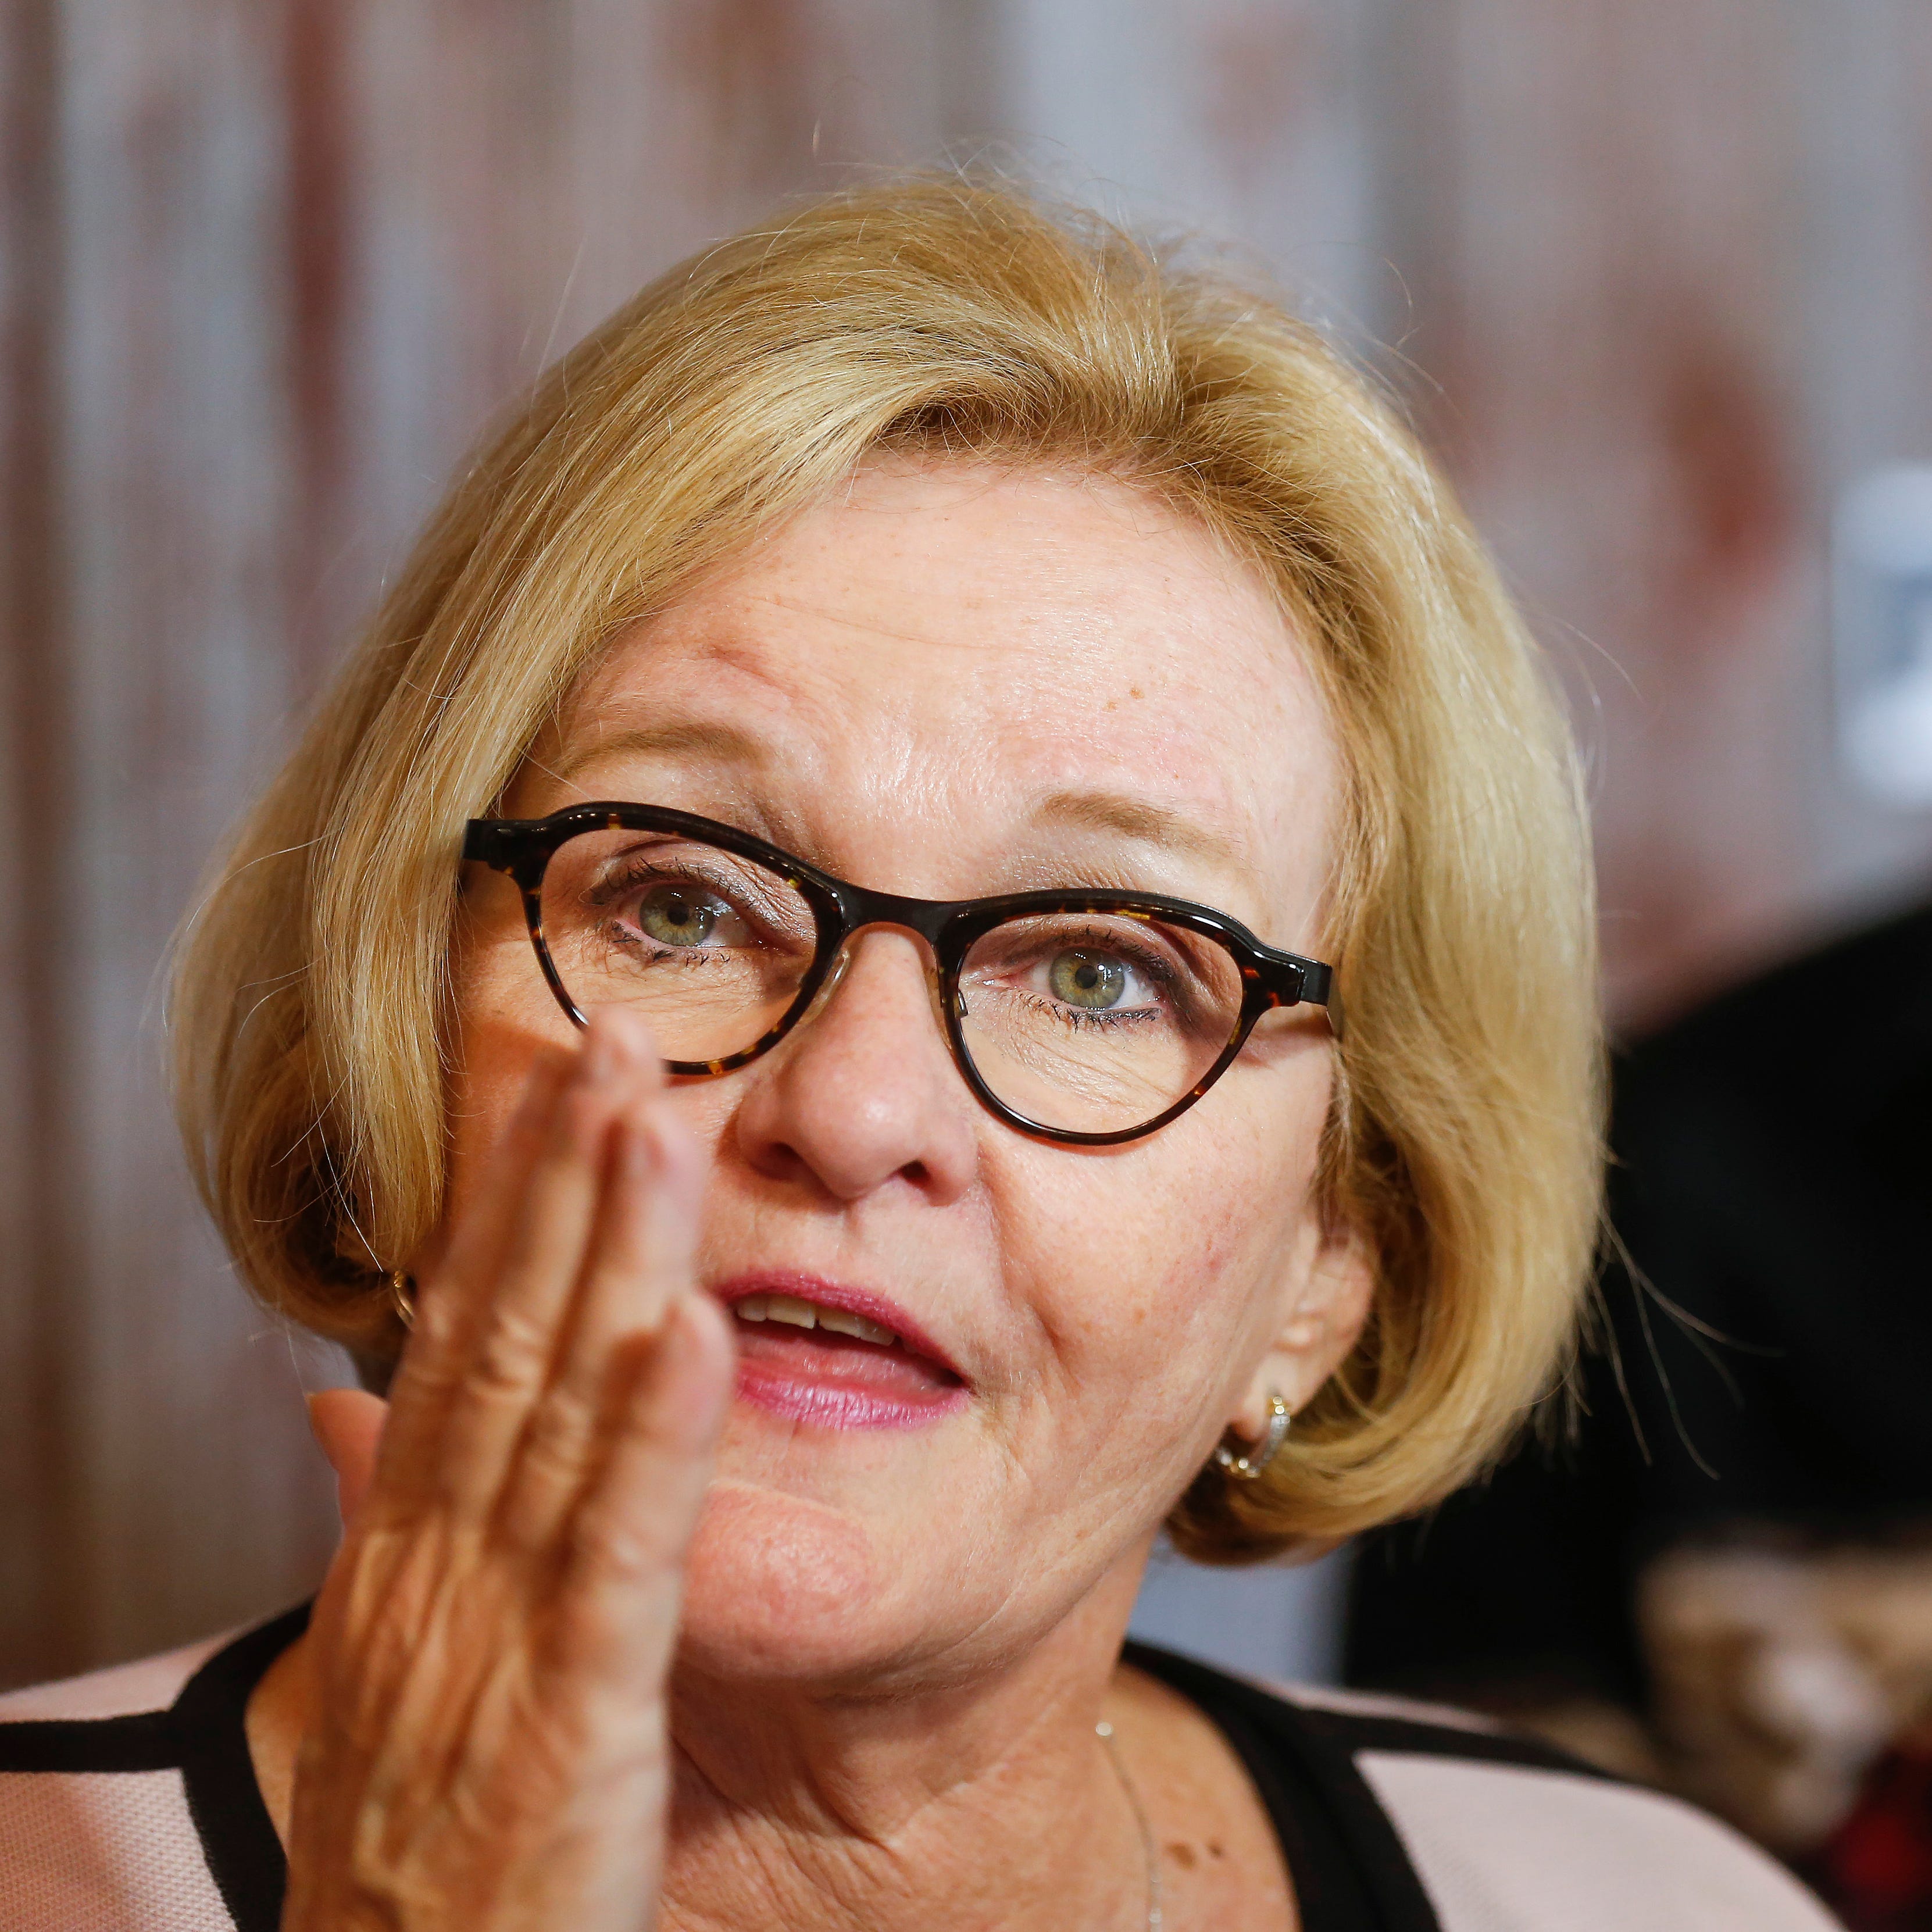 Claire McCaskill talks to the media at her campaign office in Springfield on Wednesday, Aug. 8, 2018.